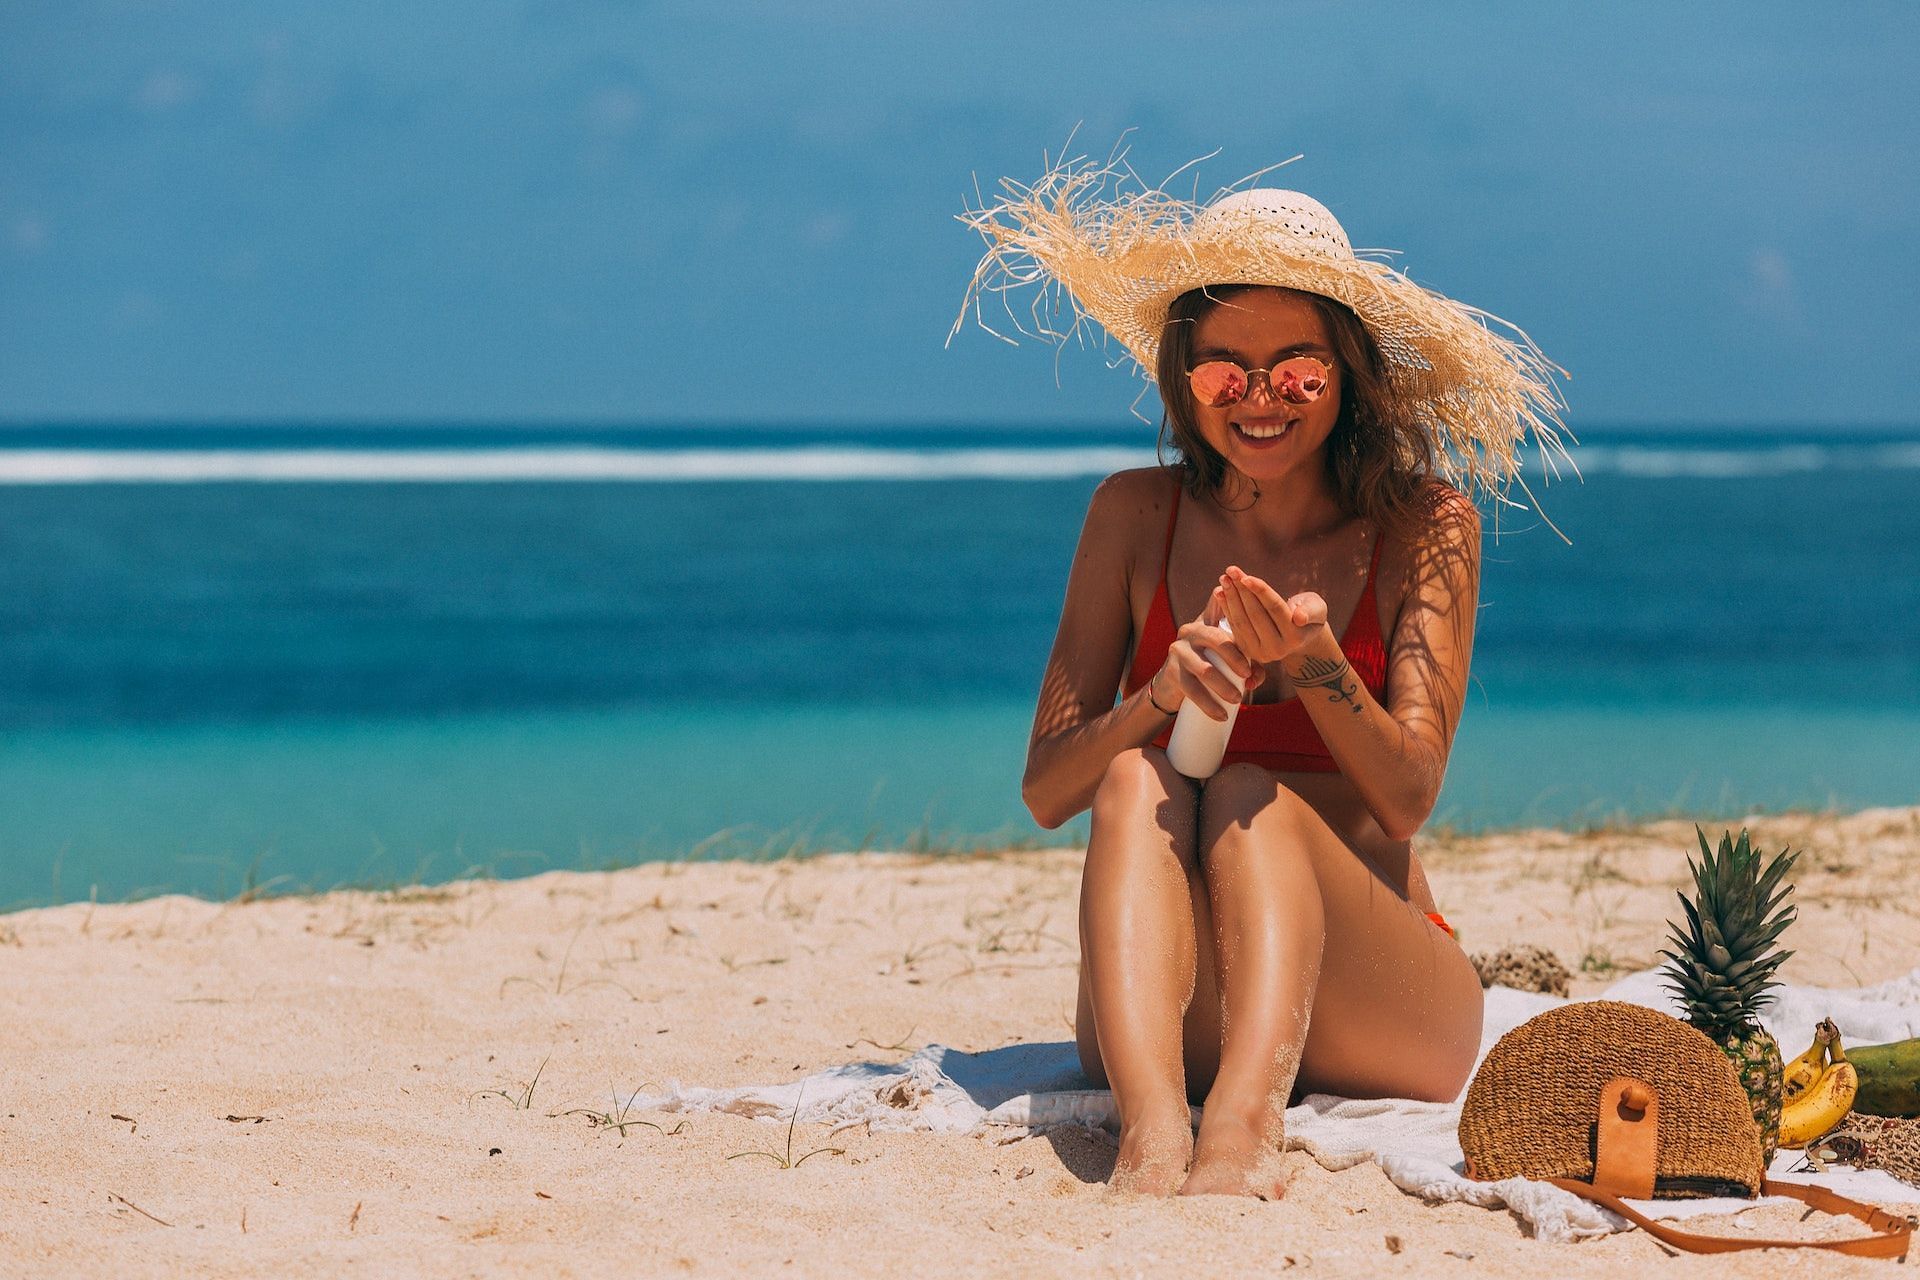 Melanoma skin cancer is caused due to too much sun exposure. (Photo via Pexels/Mikhail Nilov)